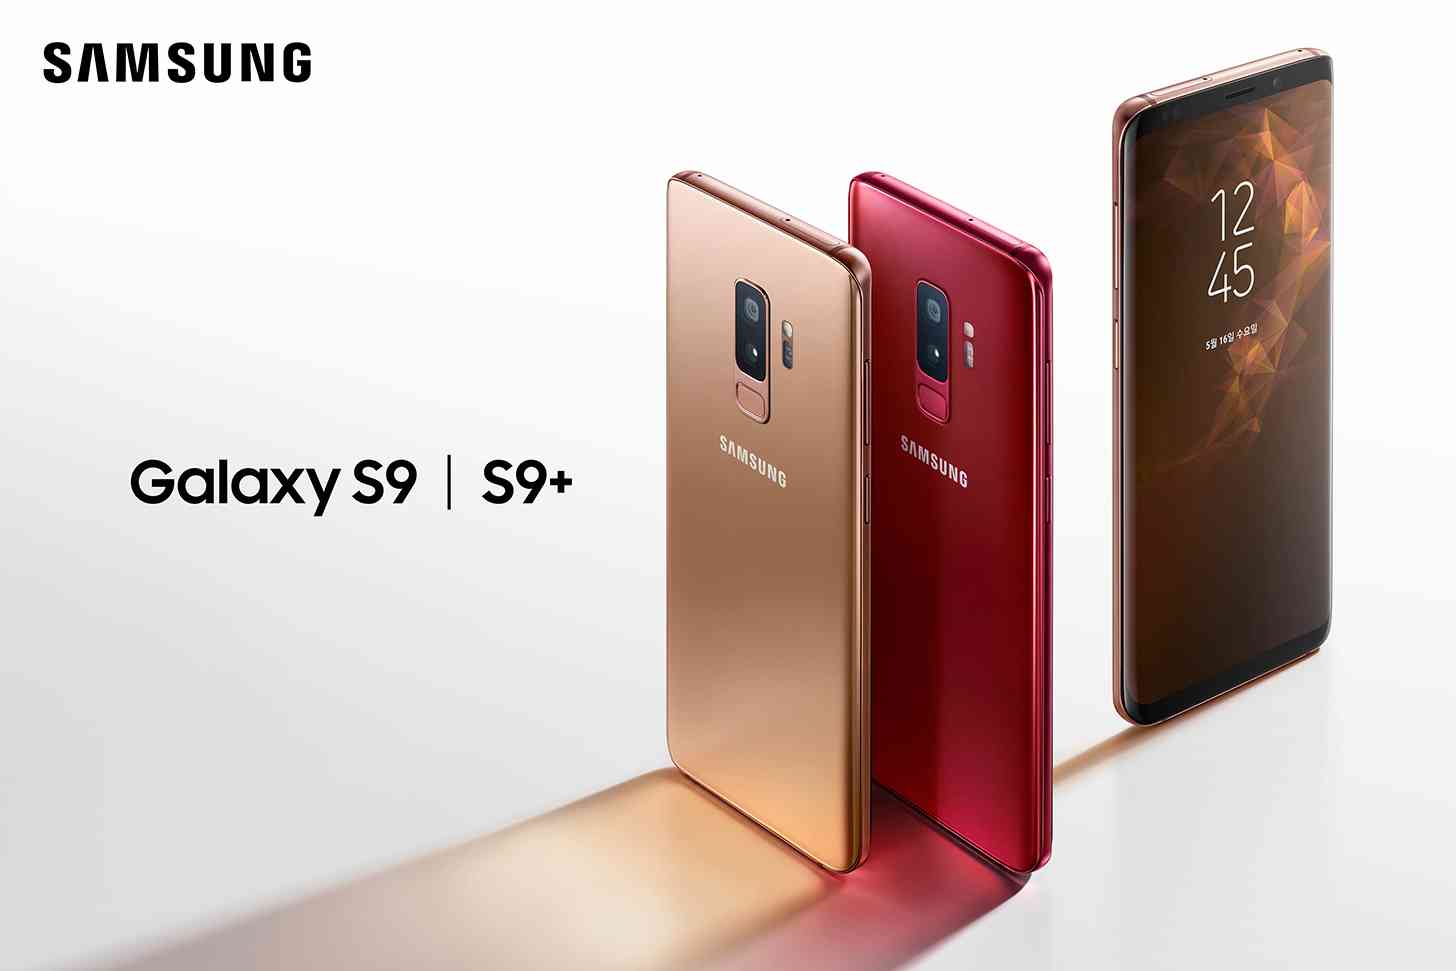 Samsung Galaxy S9 Sunrise Gold, Burgundy Red colors official